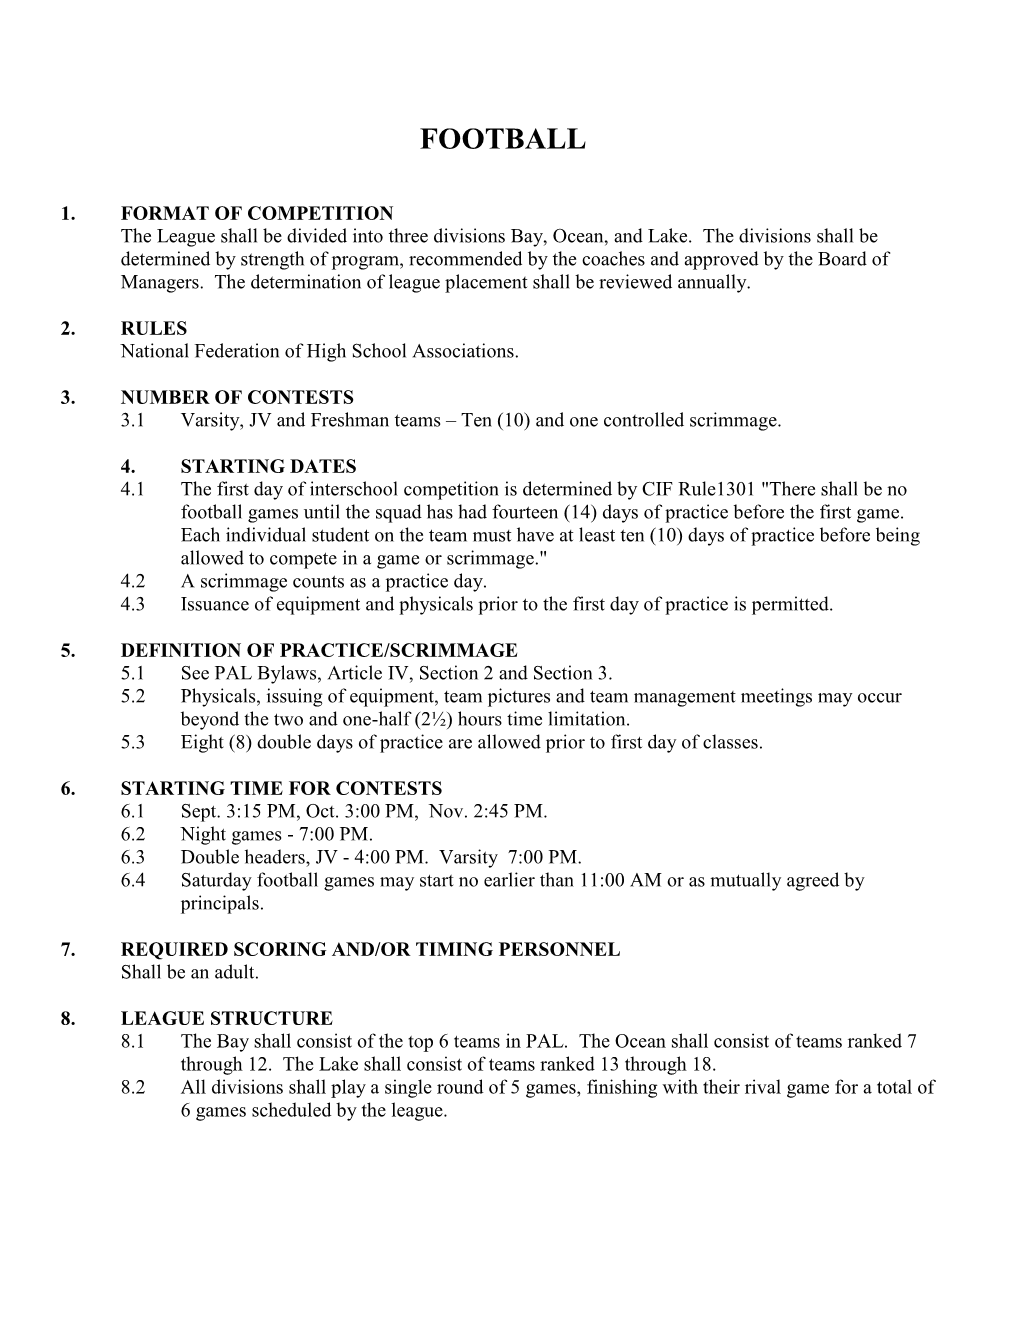 Football Bylaws, Section 9